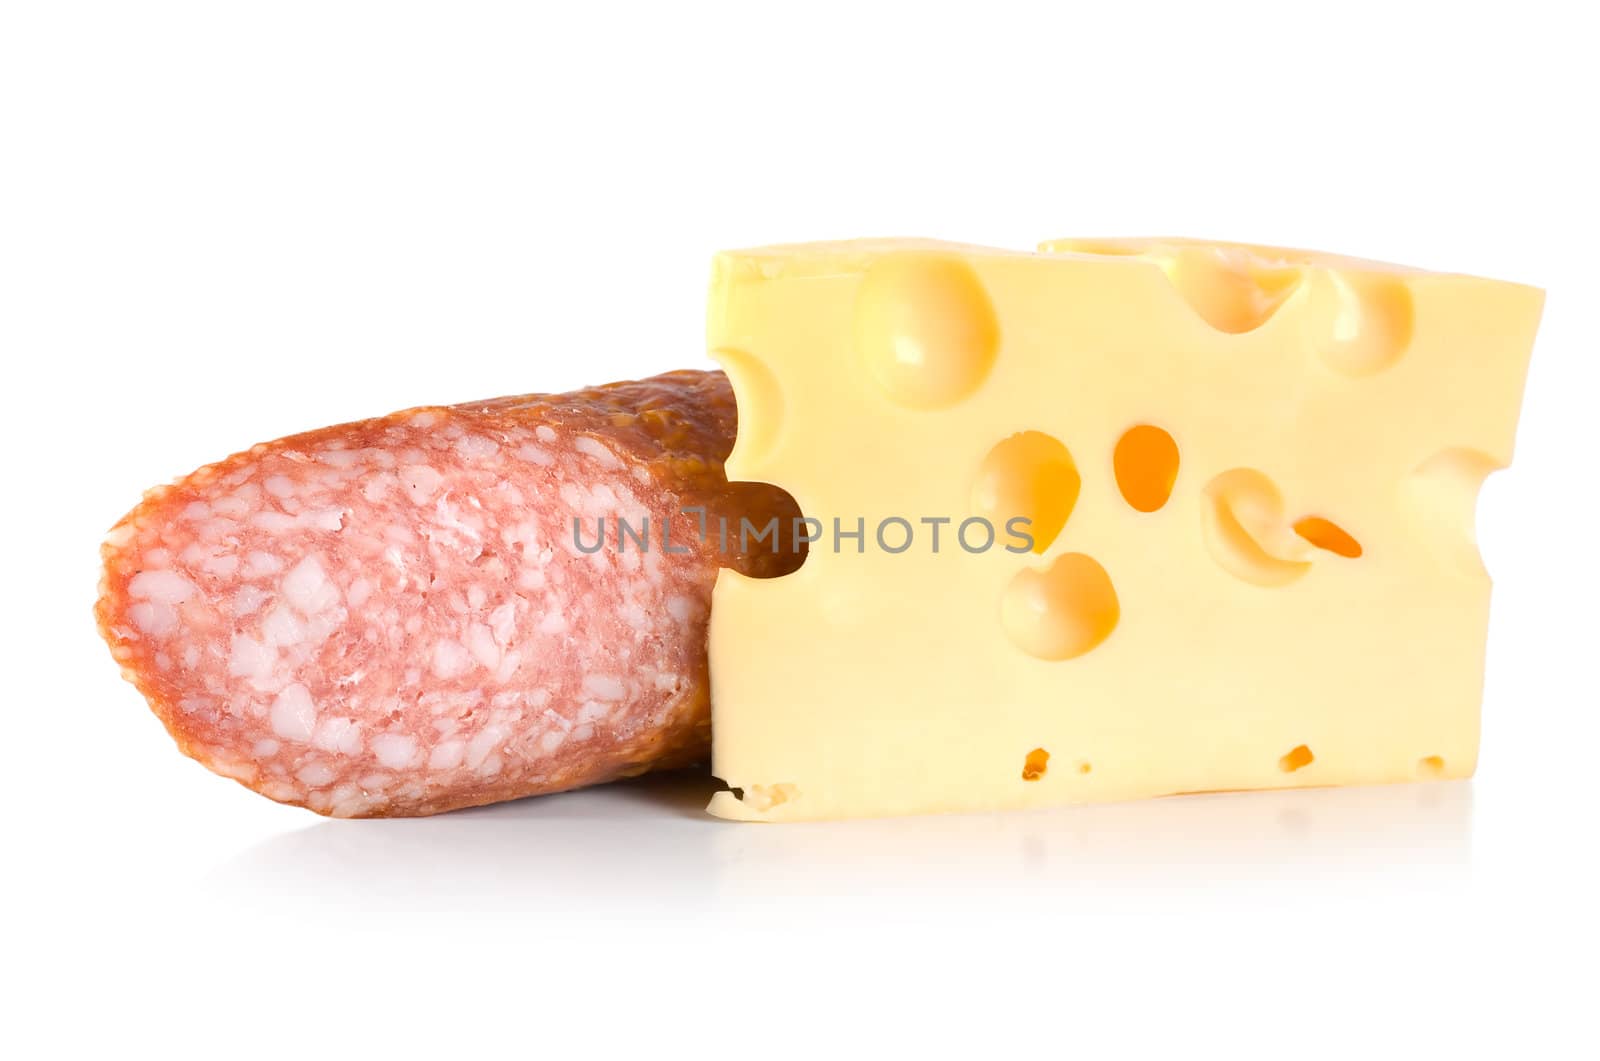 Dutch cheese and sausage by Givaga